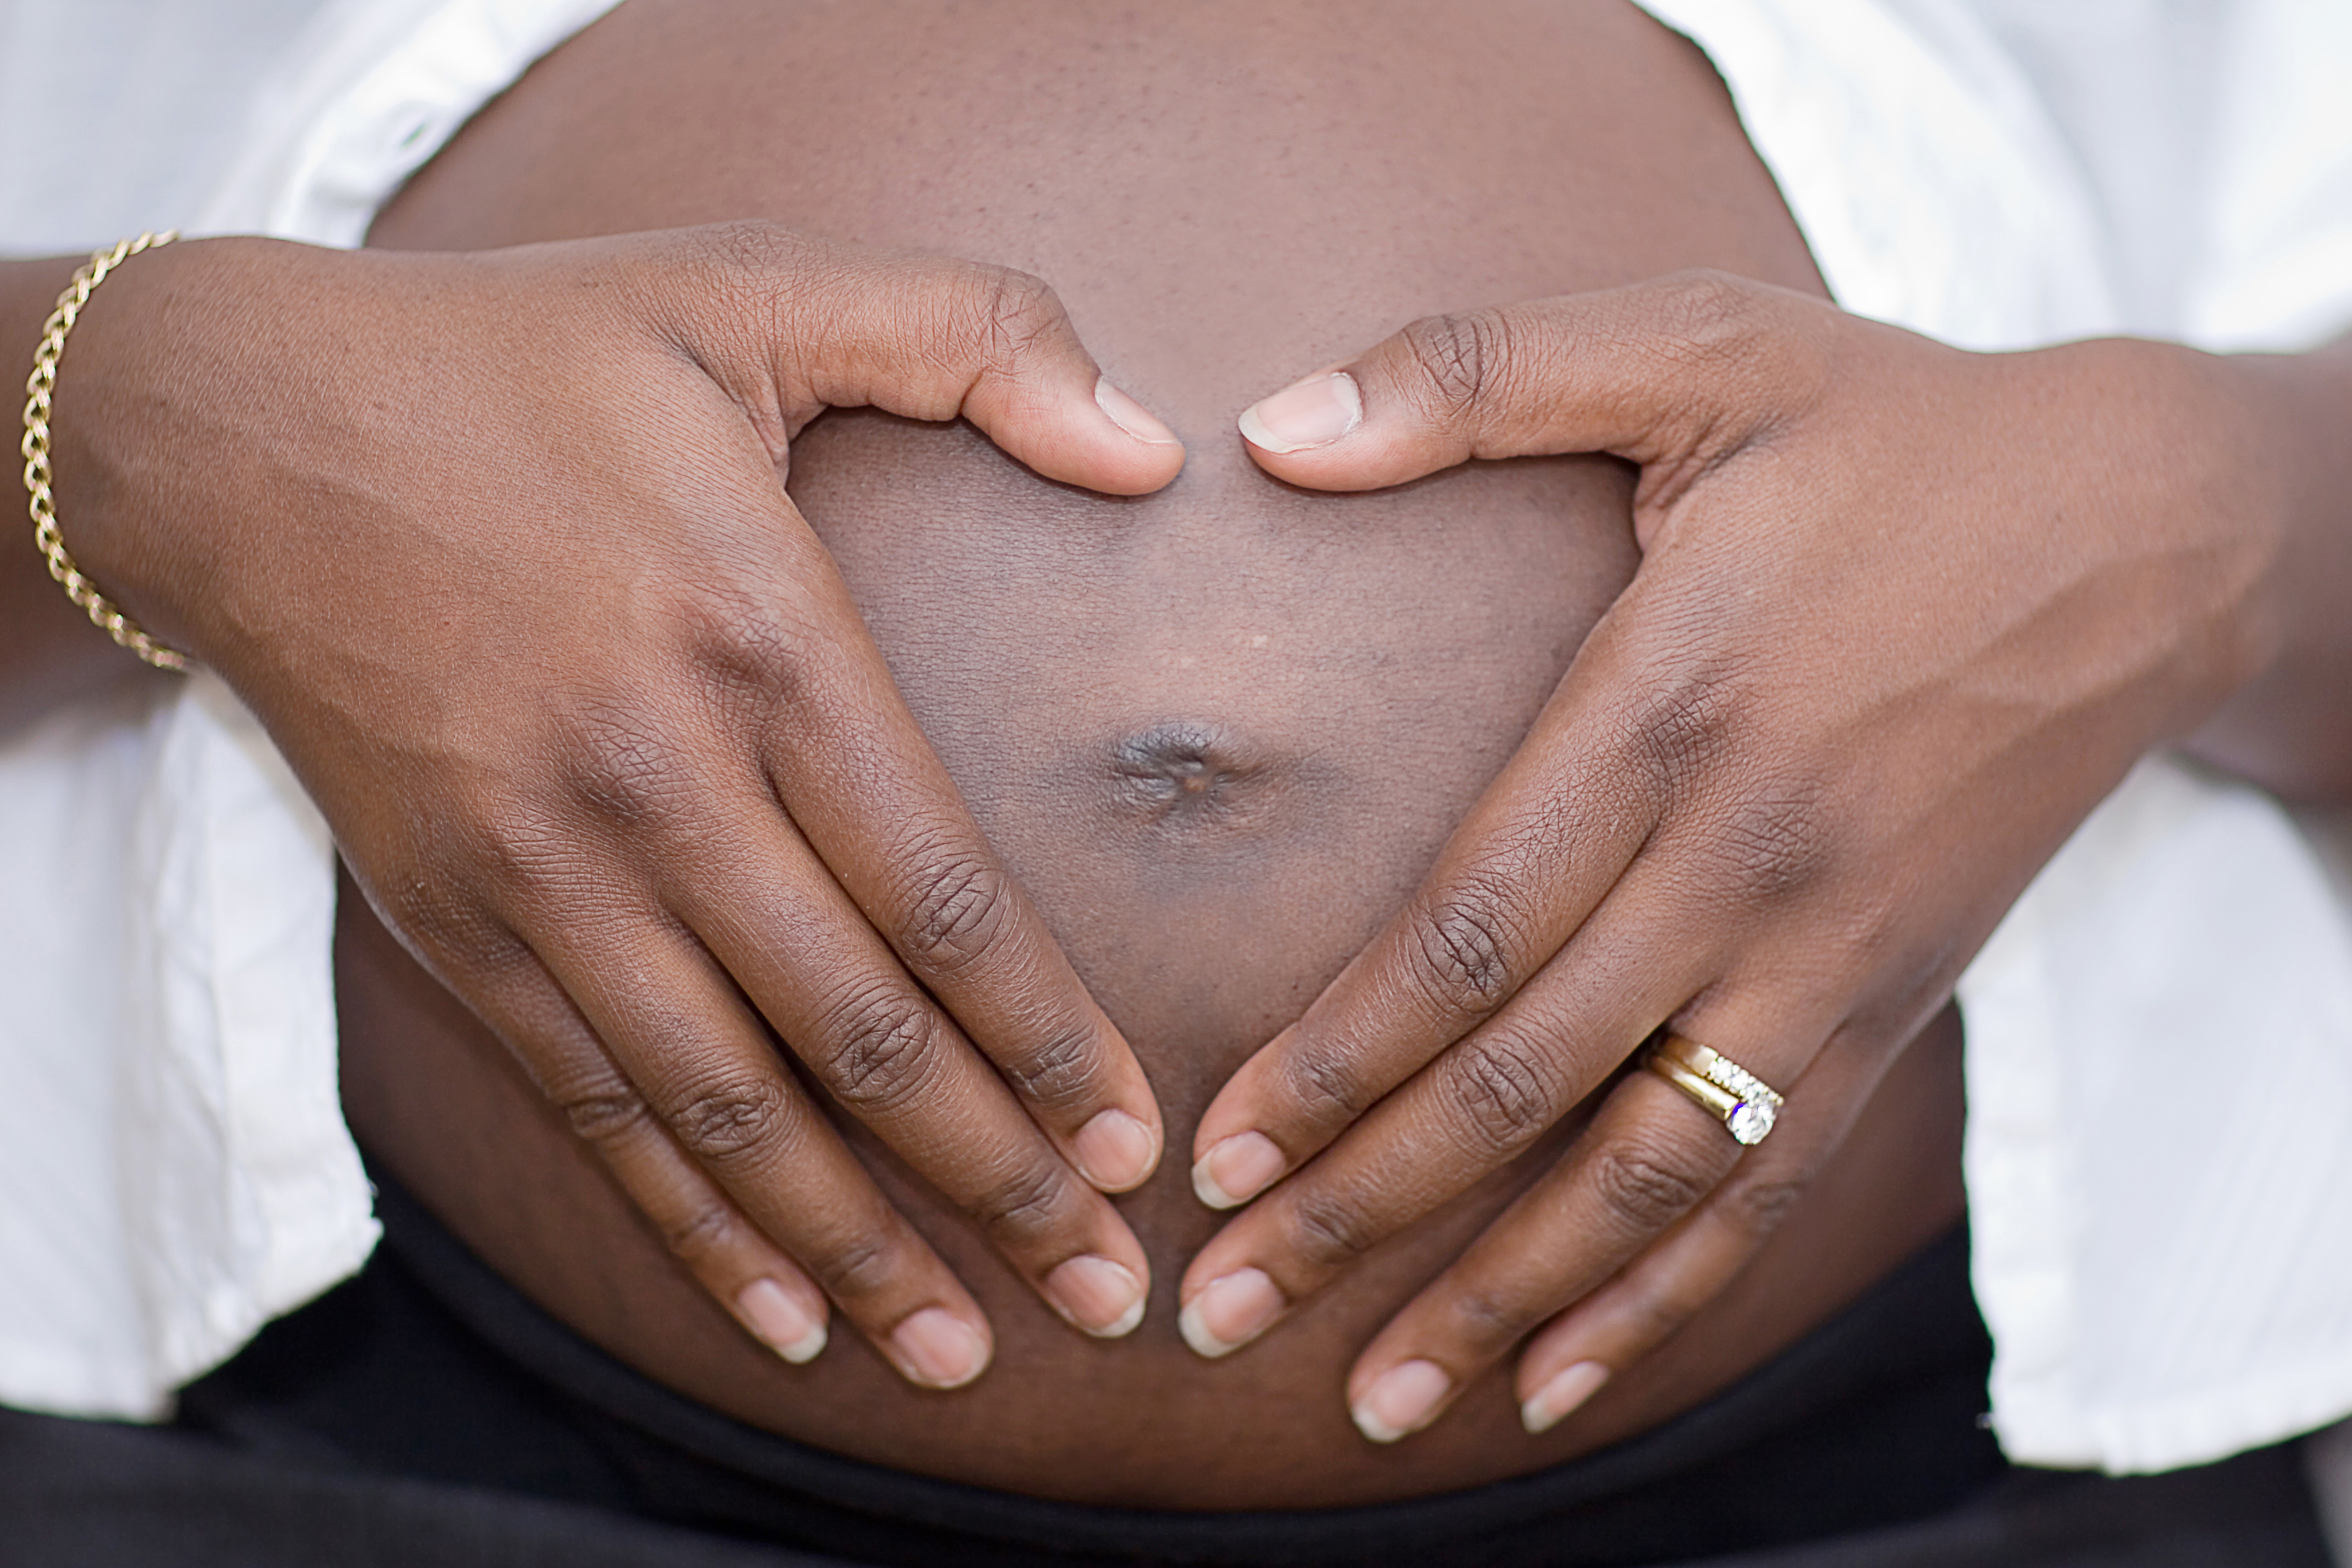 Girl black with baby pregnant white IVF mixup: